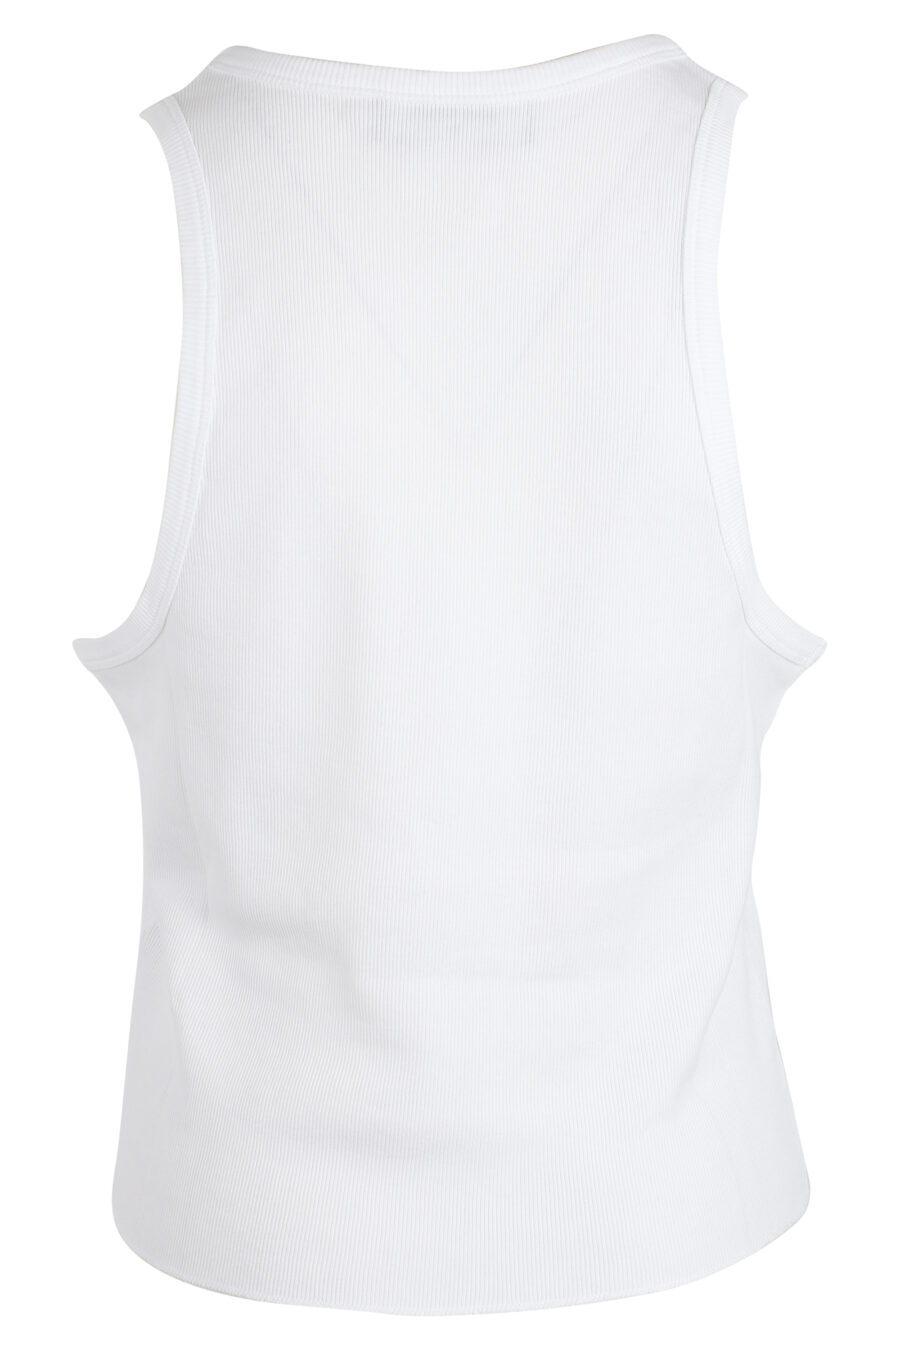 White tank top with peace logo - IMG 4861